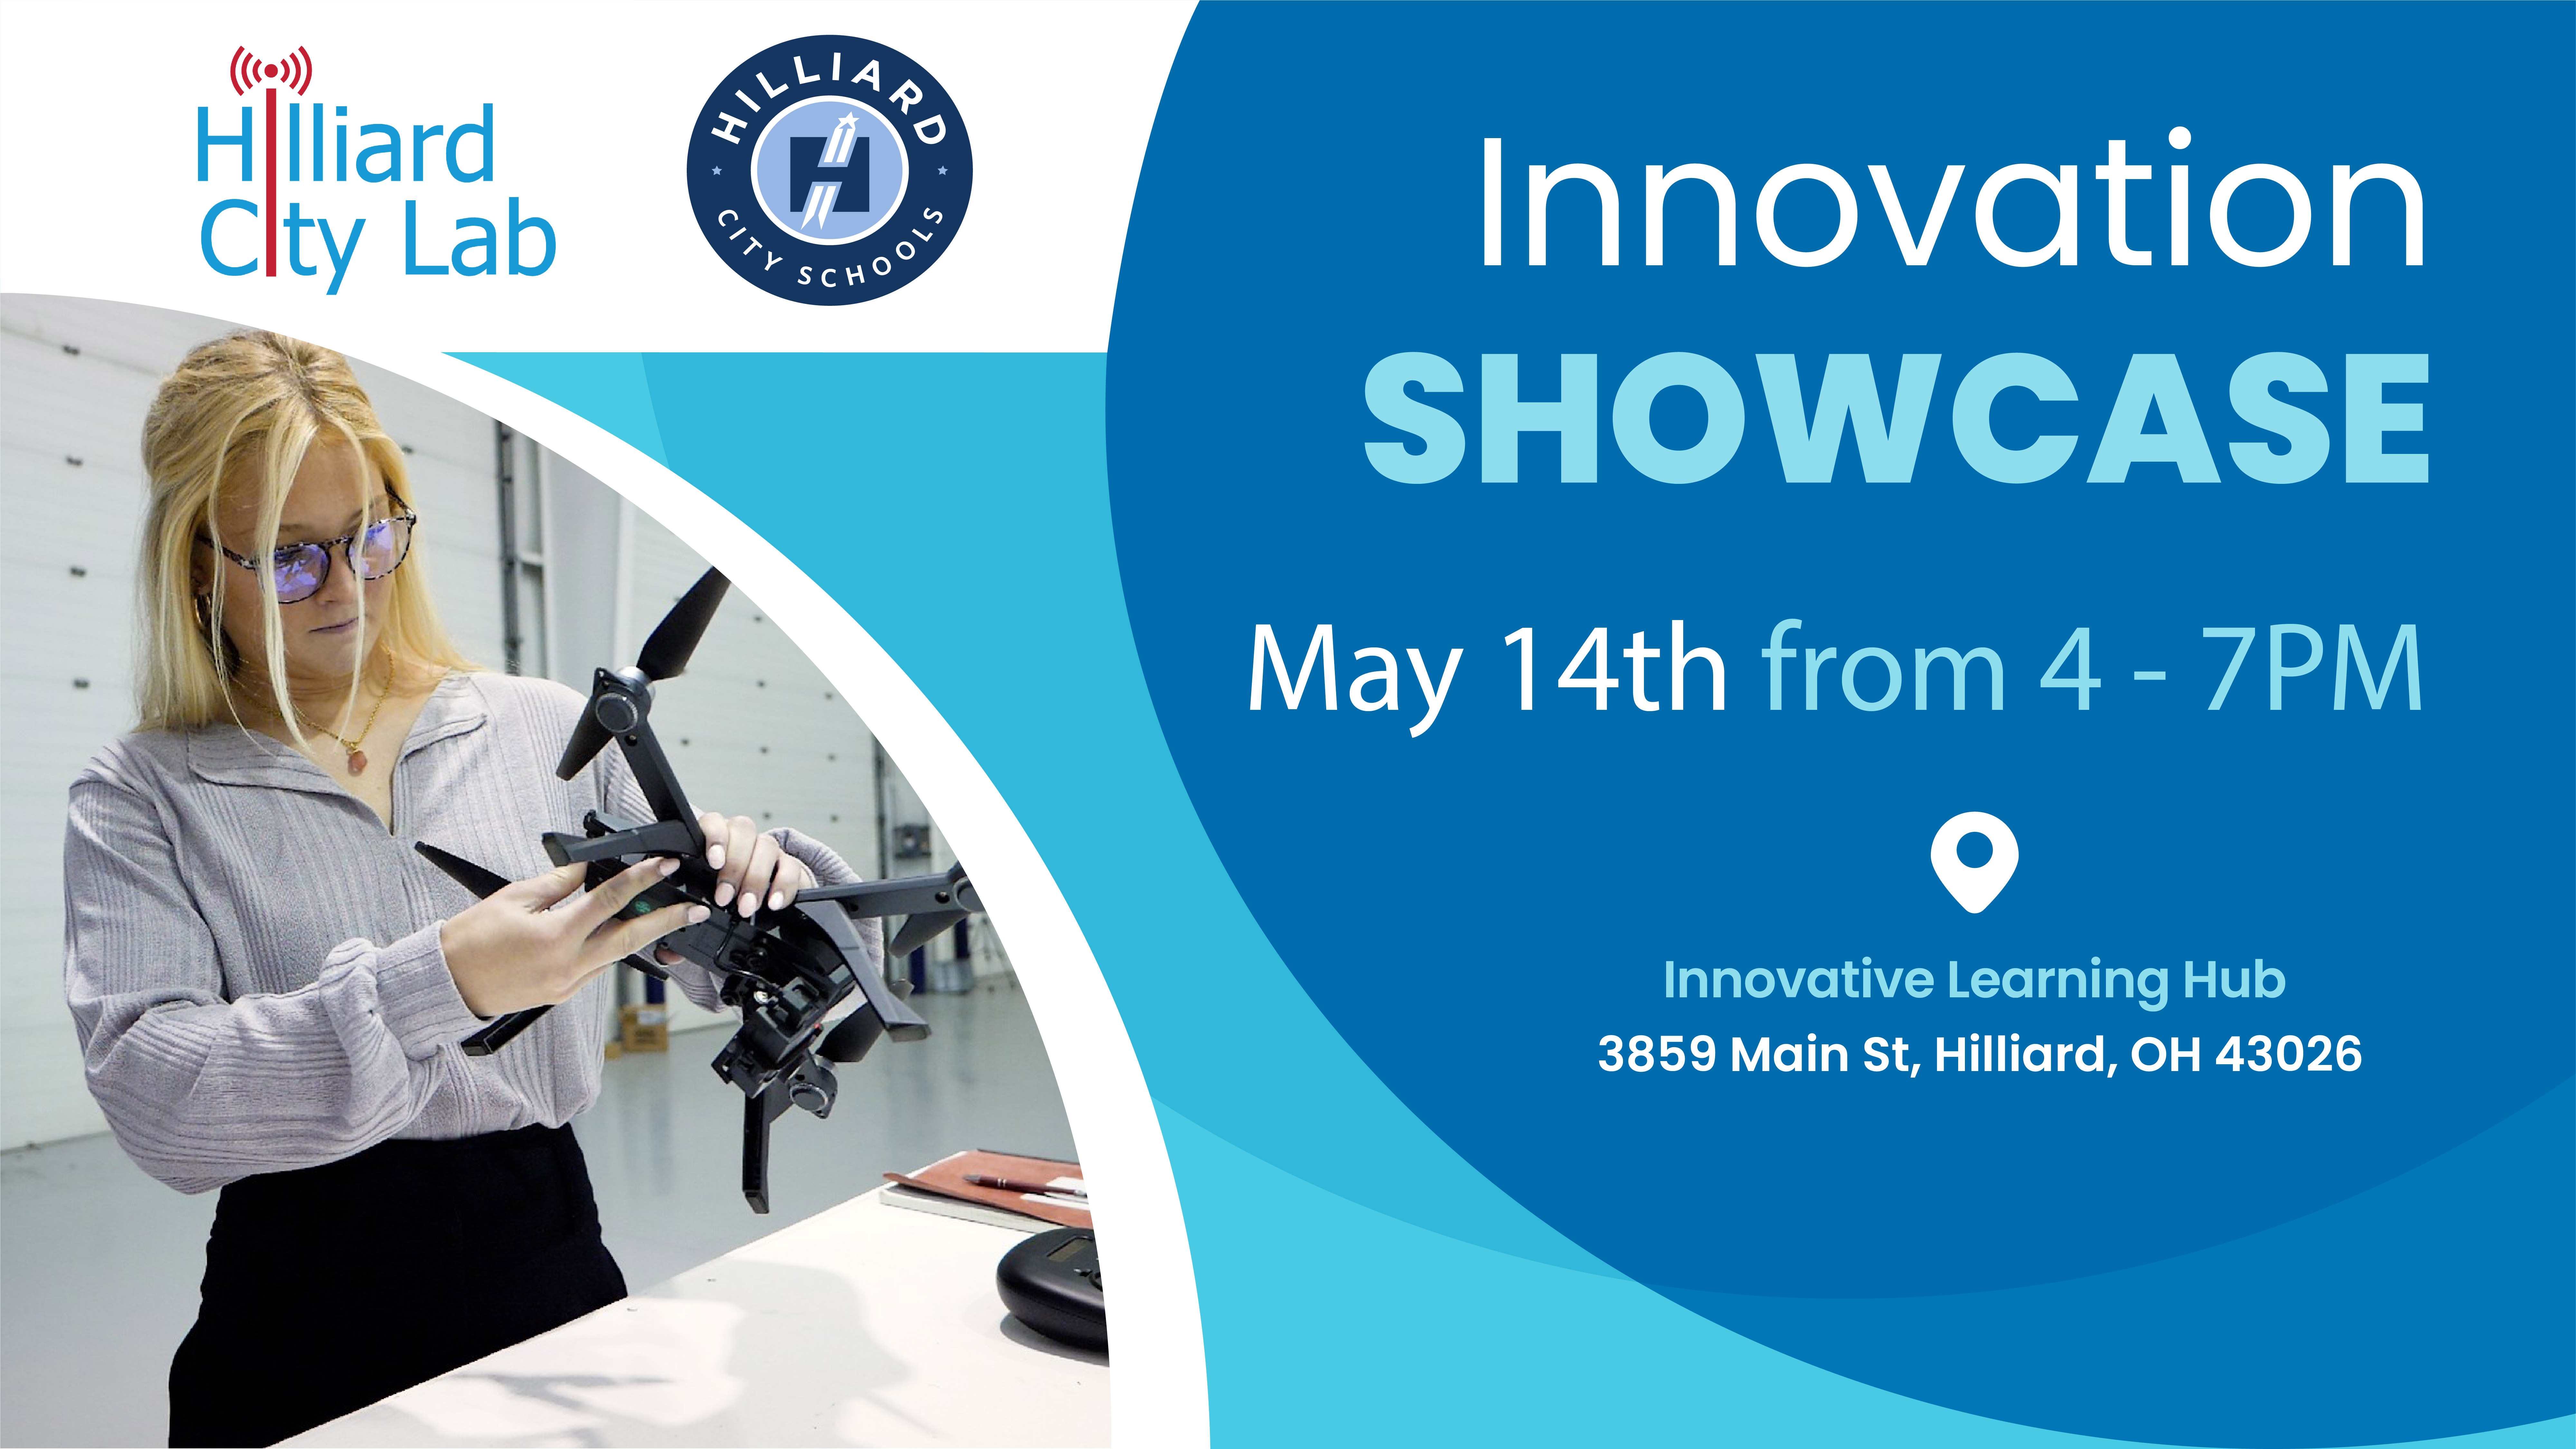 SAVE THE DATE: Innovation Showcase on May 14th